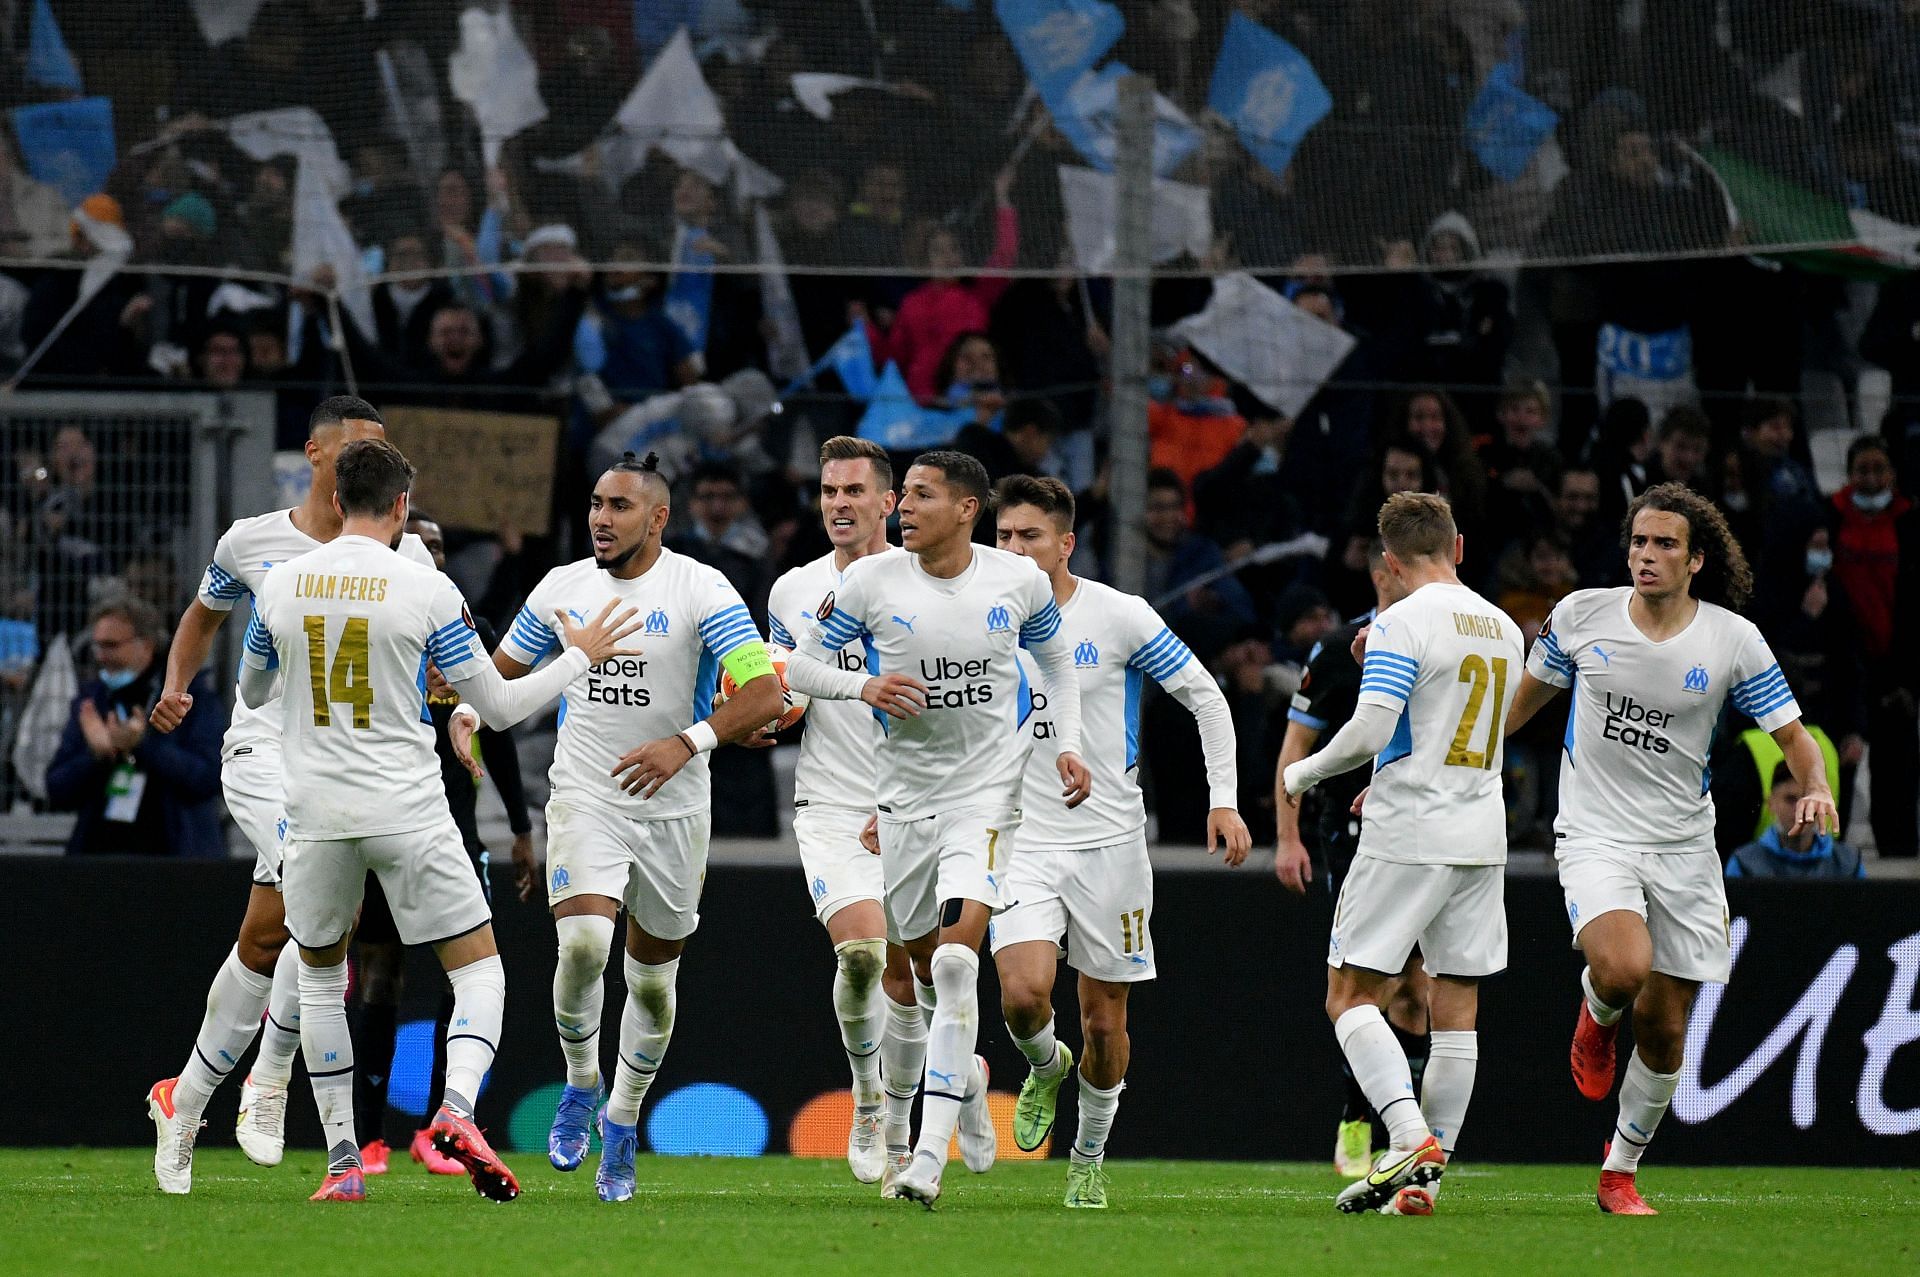 Marseille will face Nantes on Wednesday